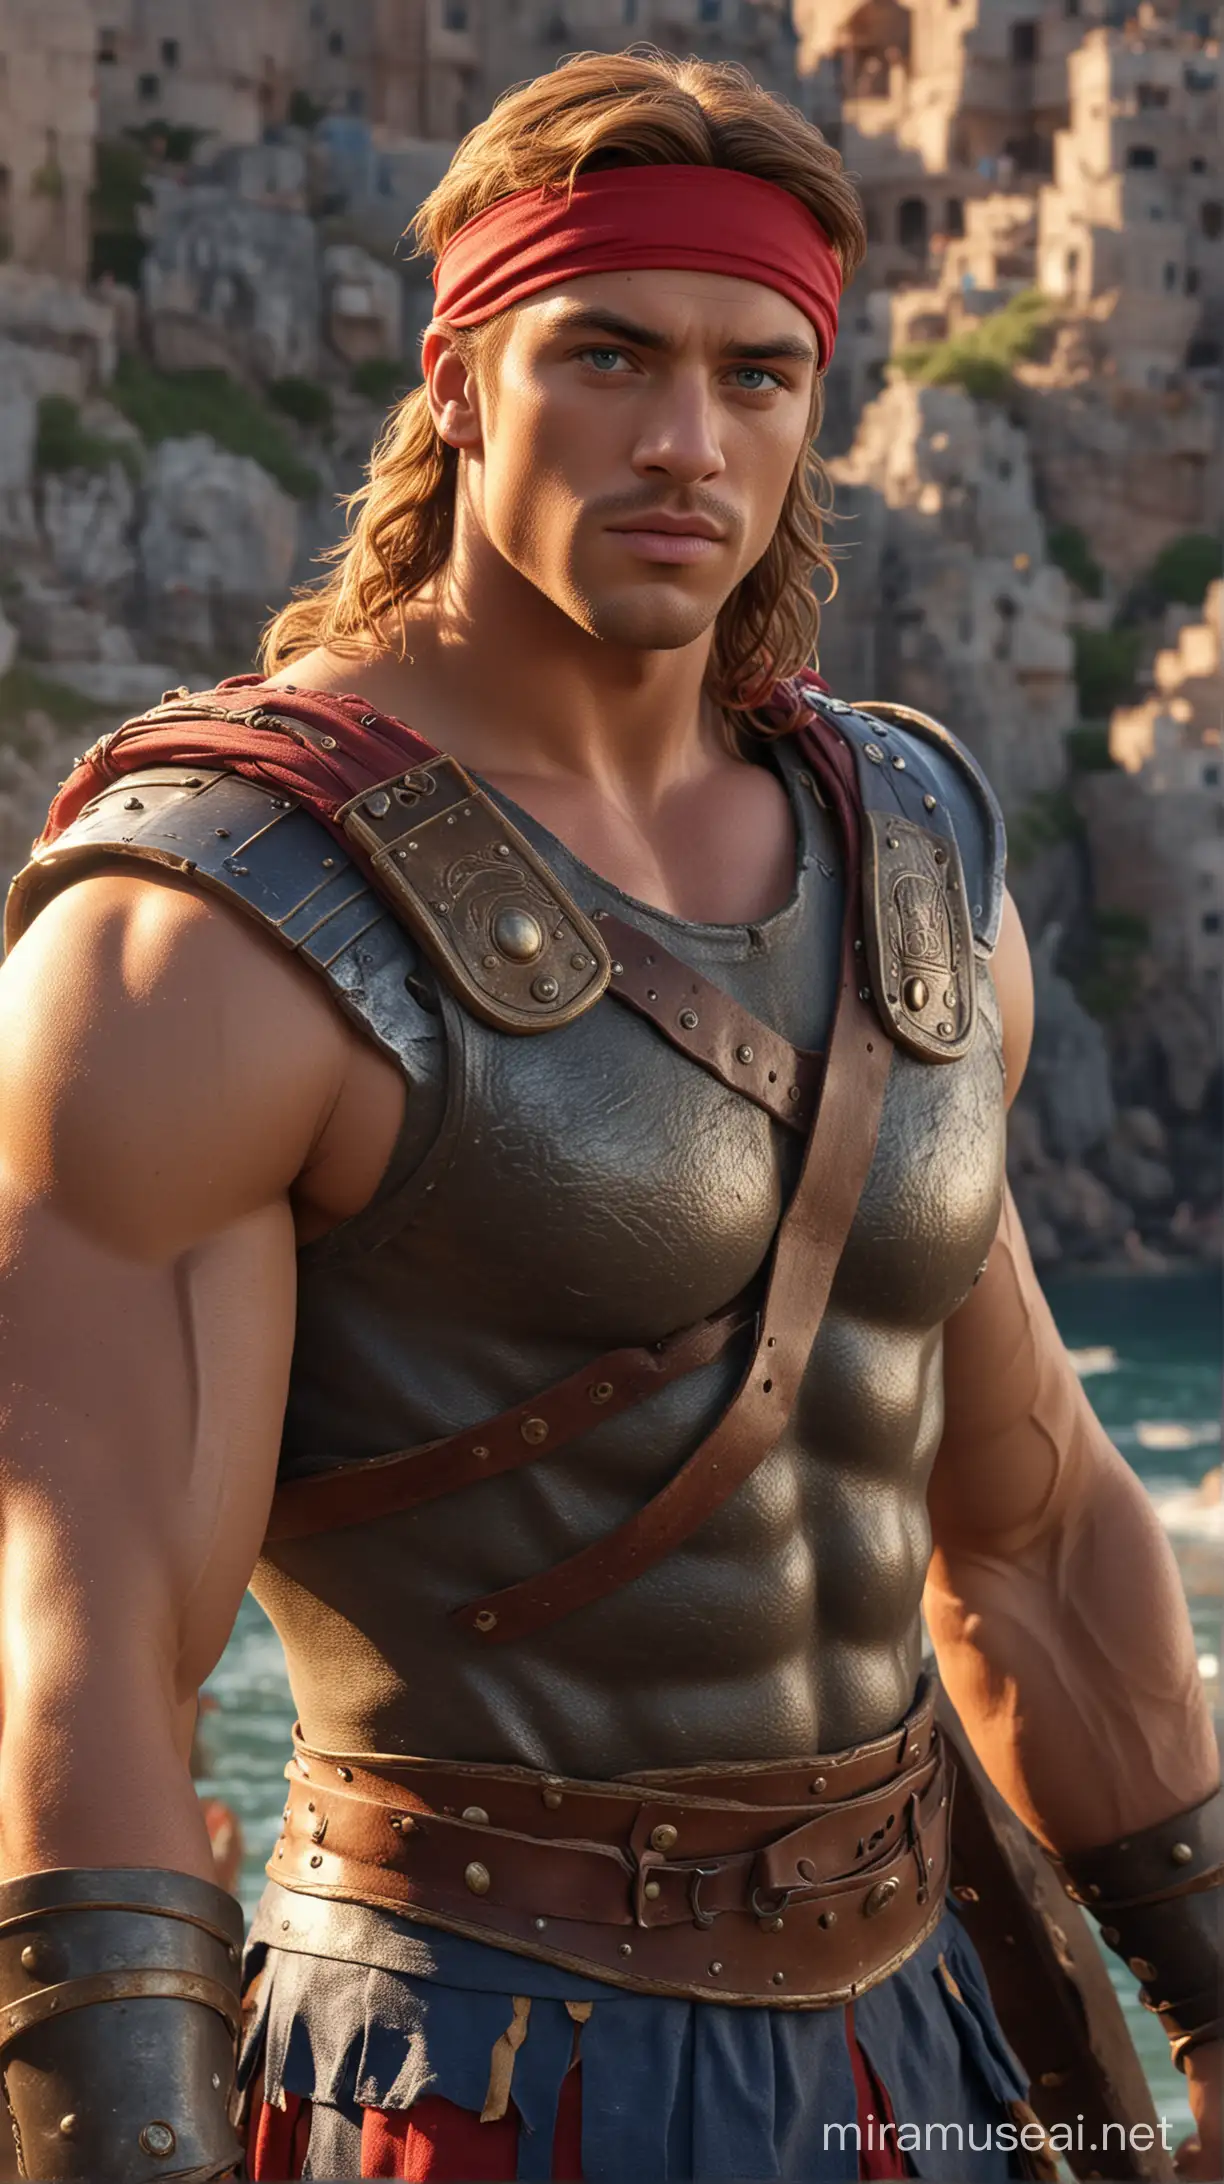 in a sea natural background military there are disney prince Hercules is Greece 21-year-old and long light brown hair with red headband  and blue eyes and very muscled and with Complet Roman gladiator uniform and face beautiful 8k re solution ultra-realistic